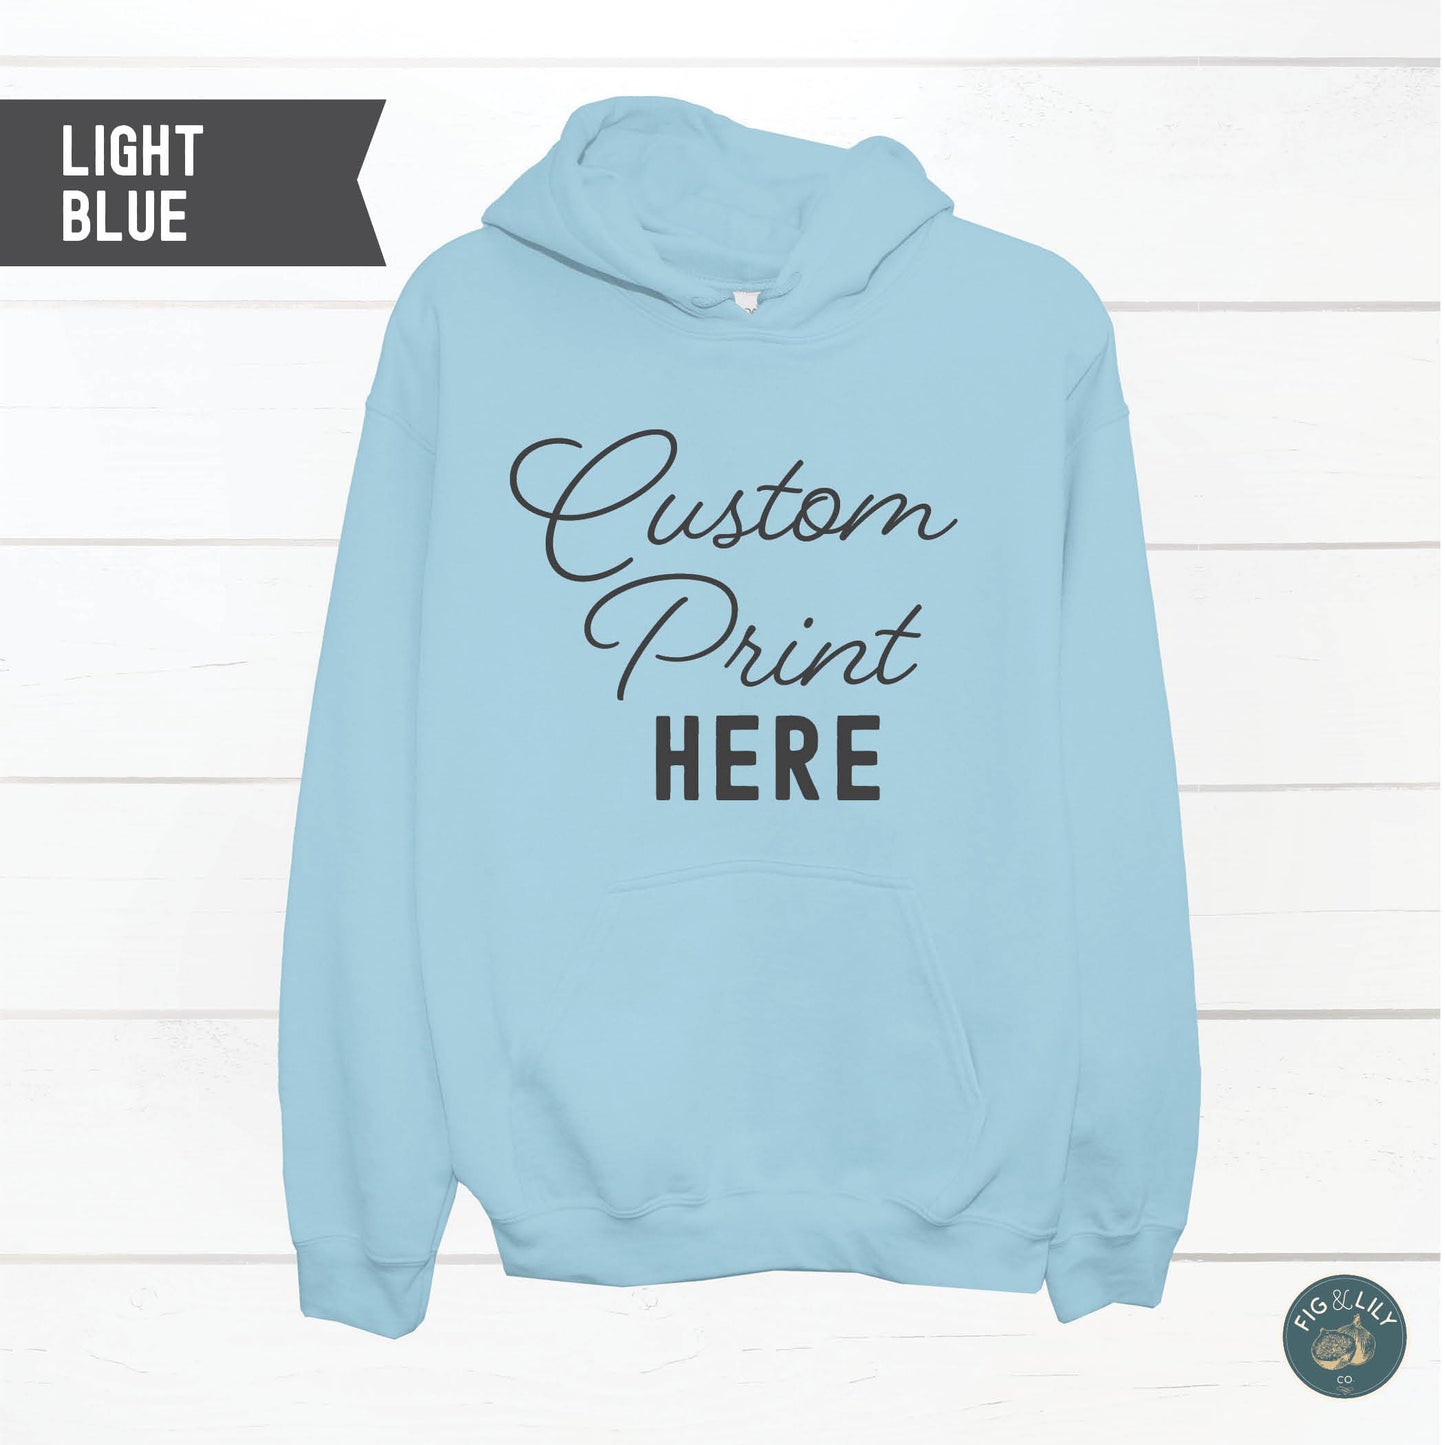 Light Baby Blue Unisex Hoodie, Custom Printed sweatshirt Design, Your Design Here, Personalized Design created just for you, digital proof approval included